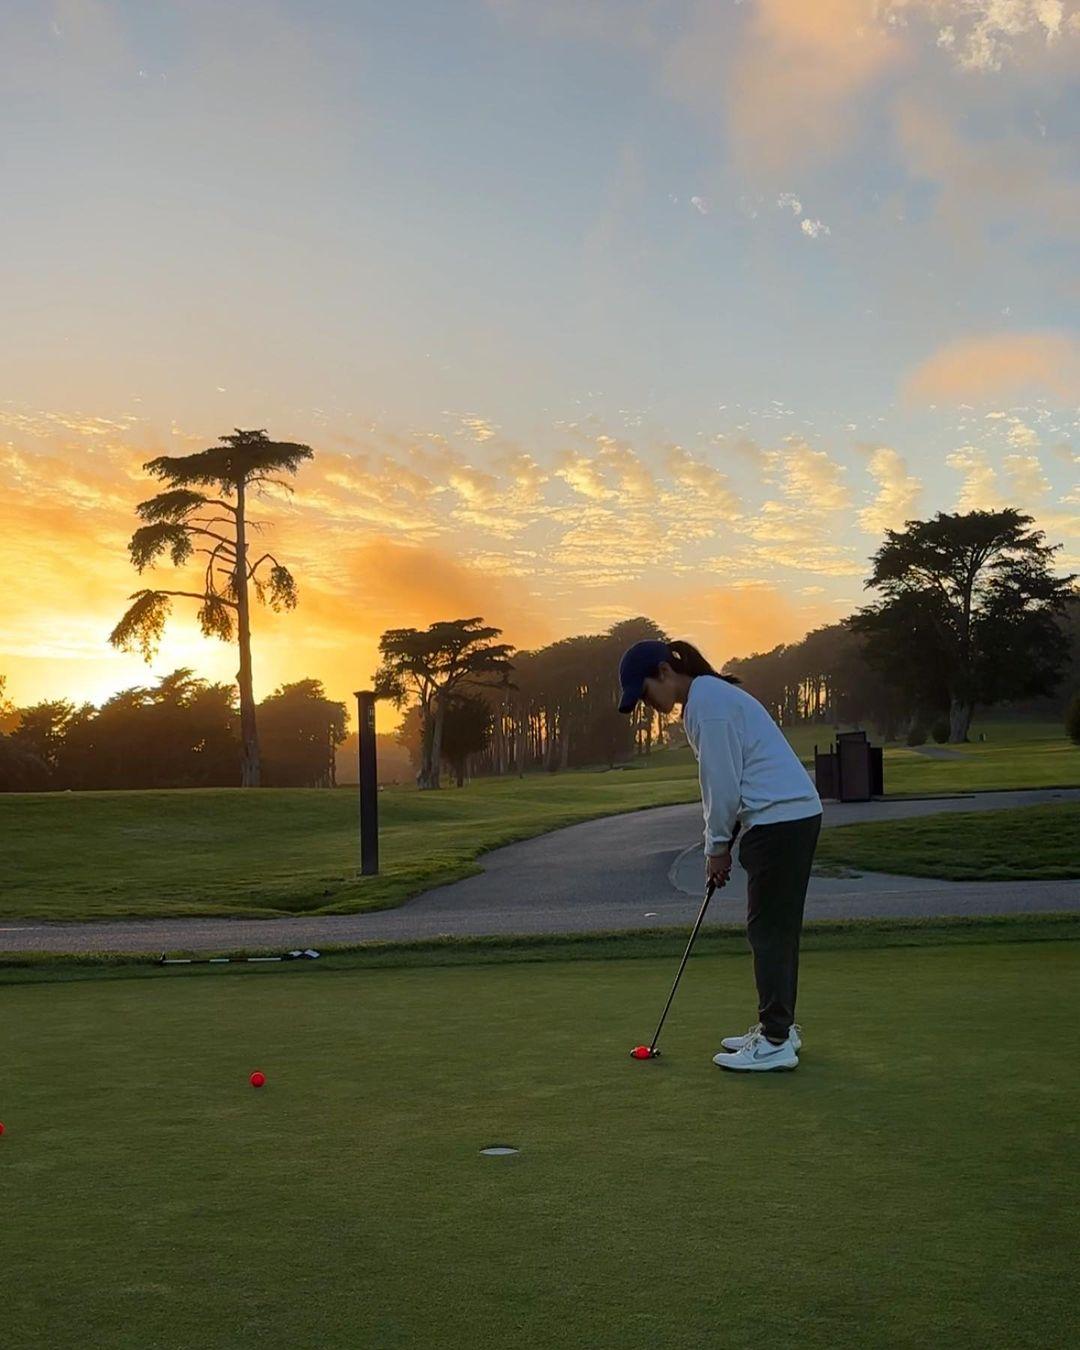 instagram photo of someone playing golf at sunset